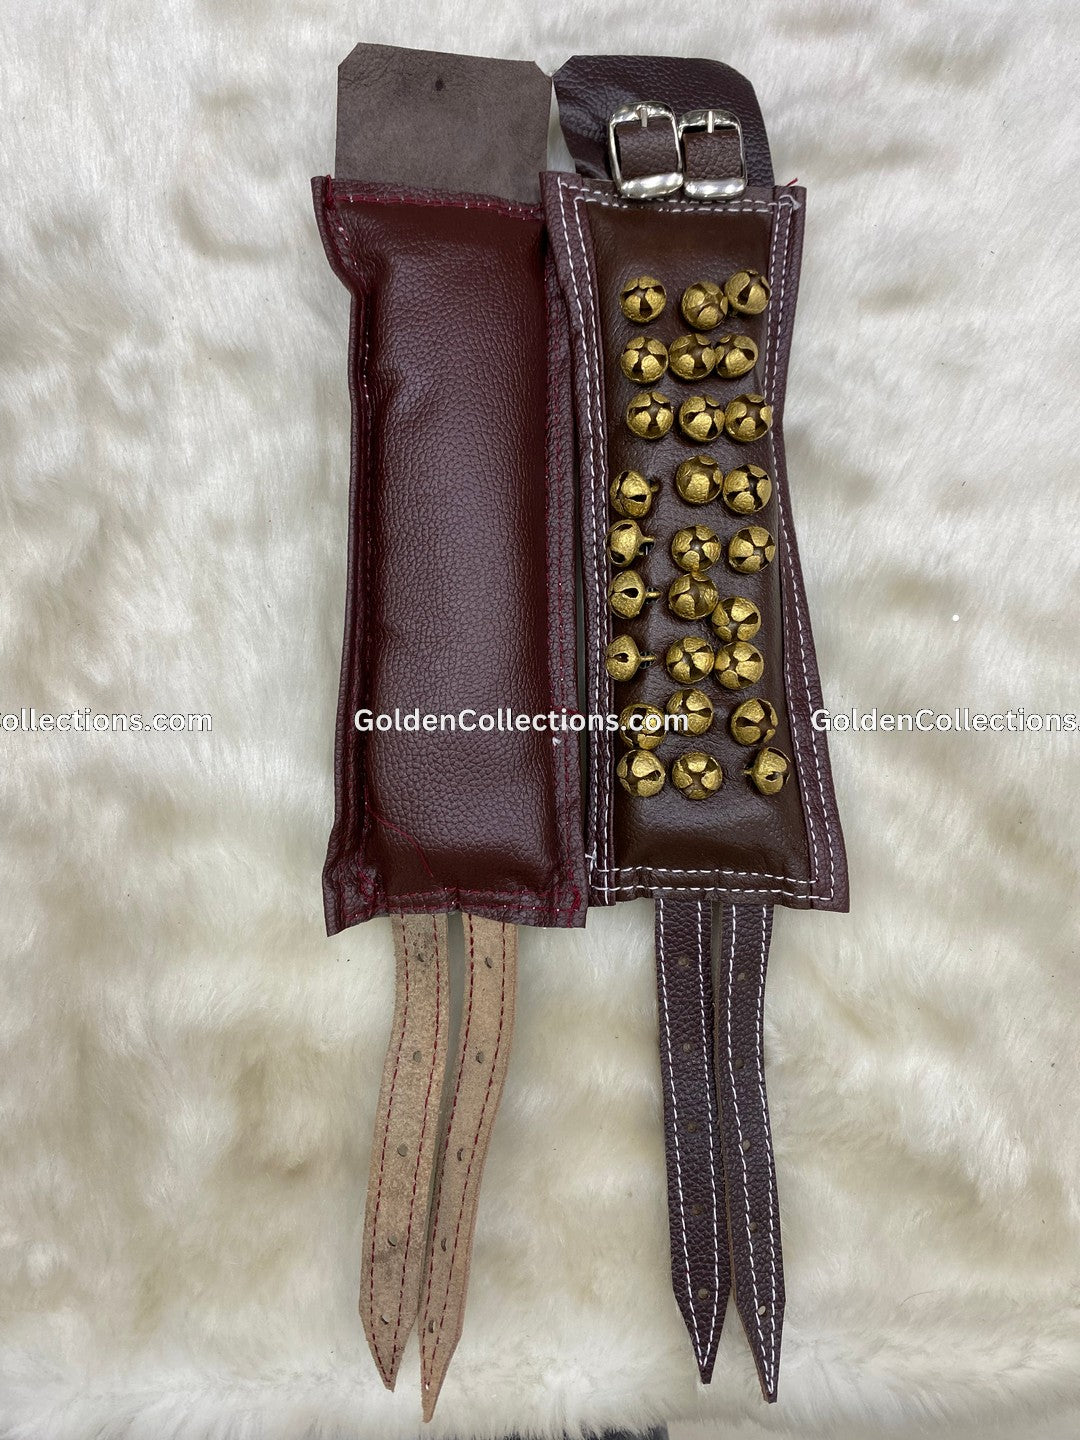 3-Line-Brown-Leather-Ghungroo-Salangai-GoldenCollections-2